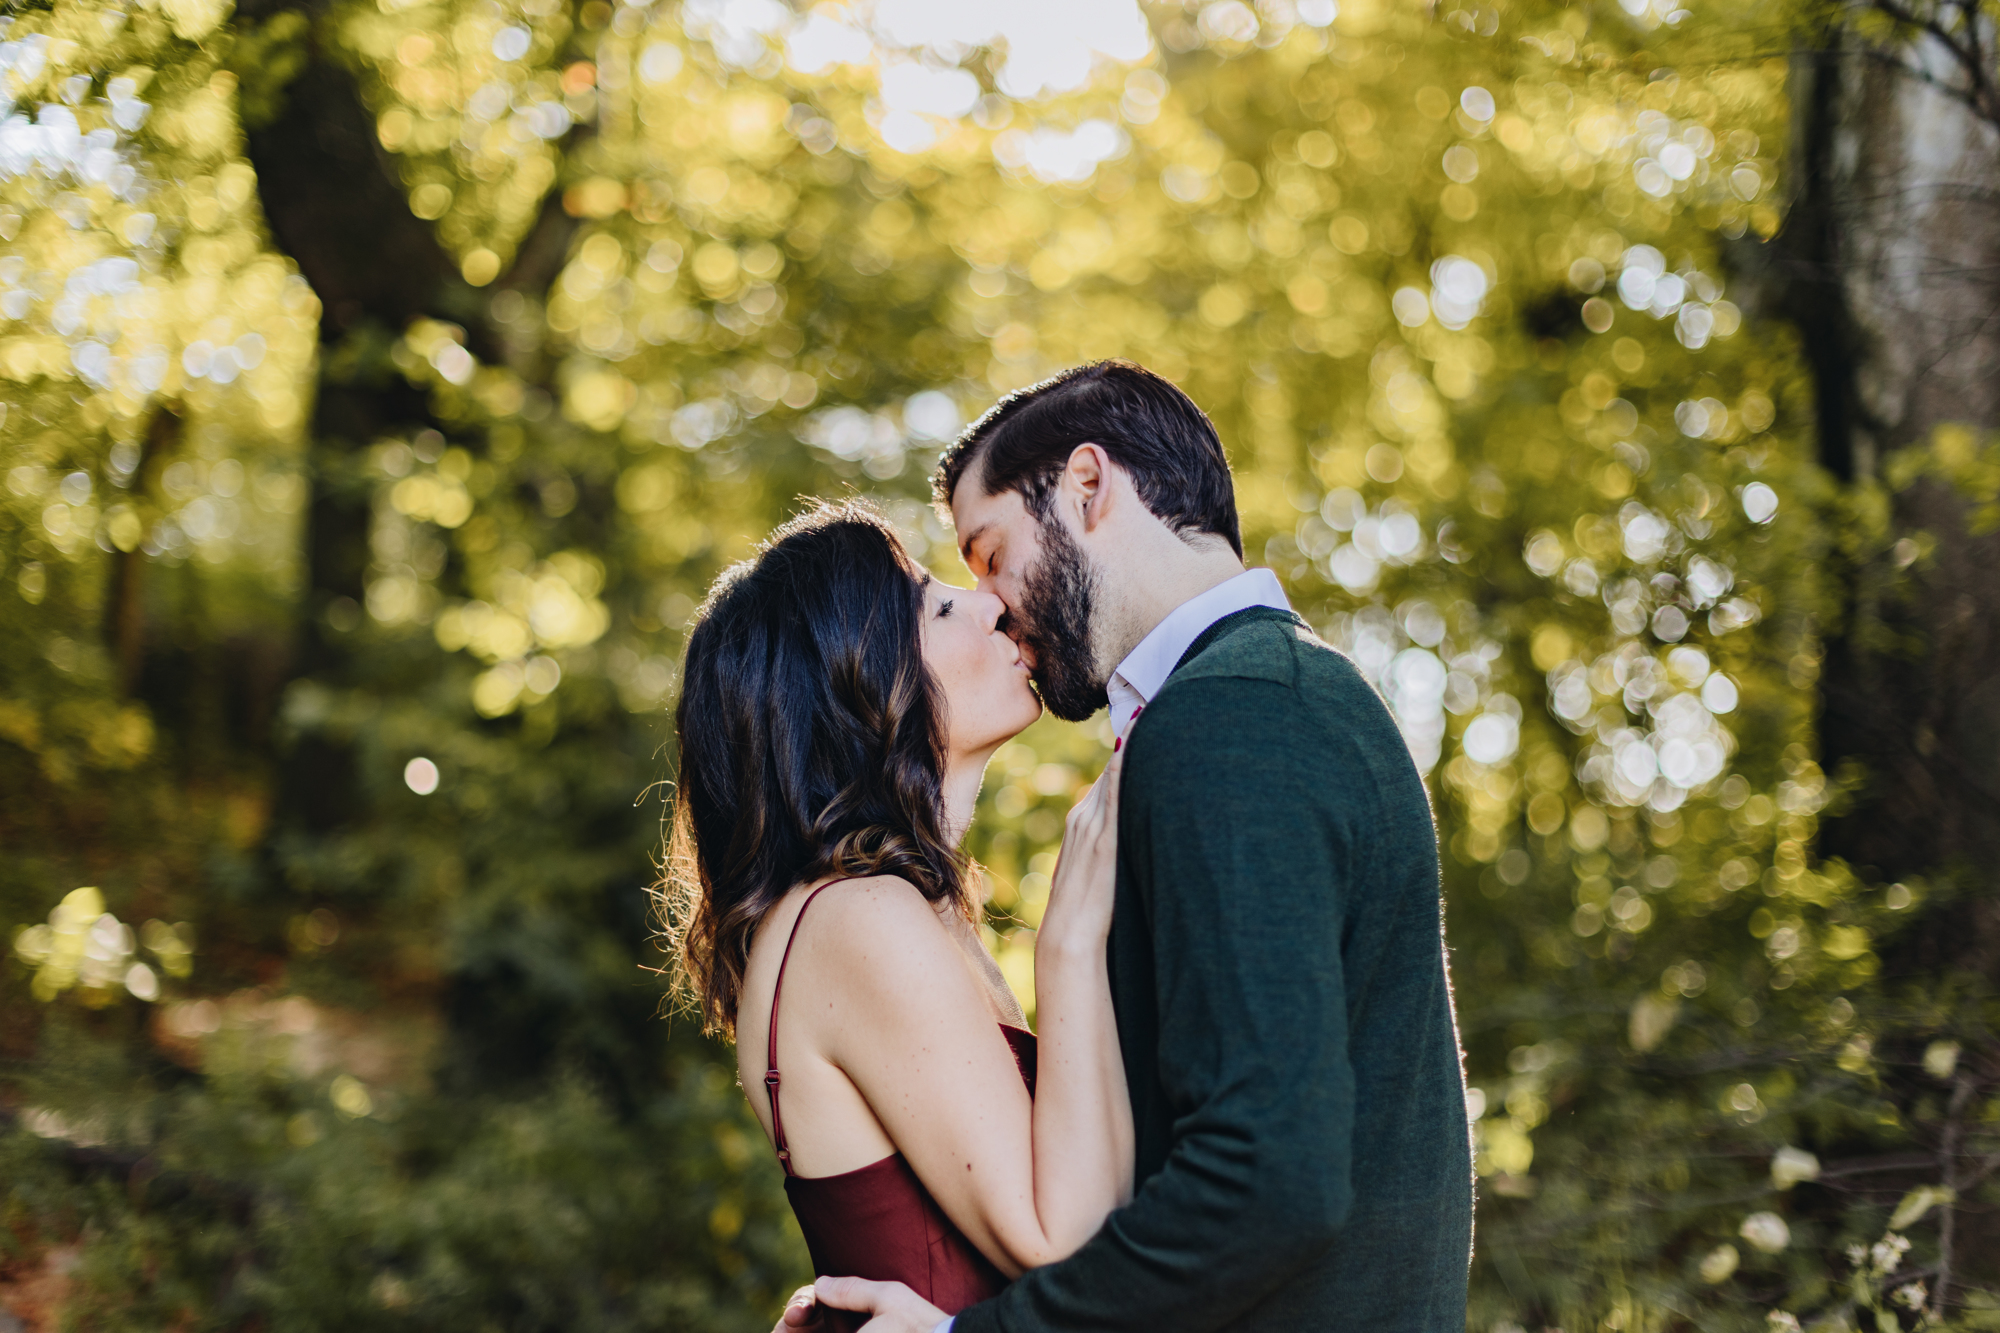 Dazzling Central Park Engagement Photos in Fall